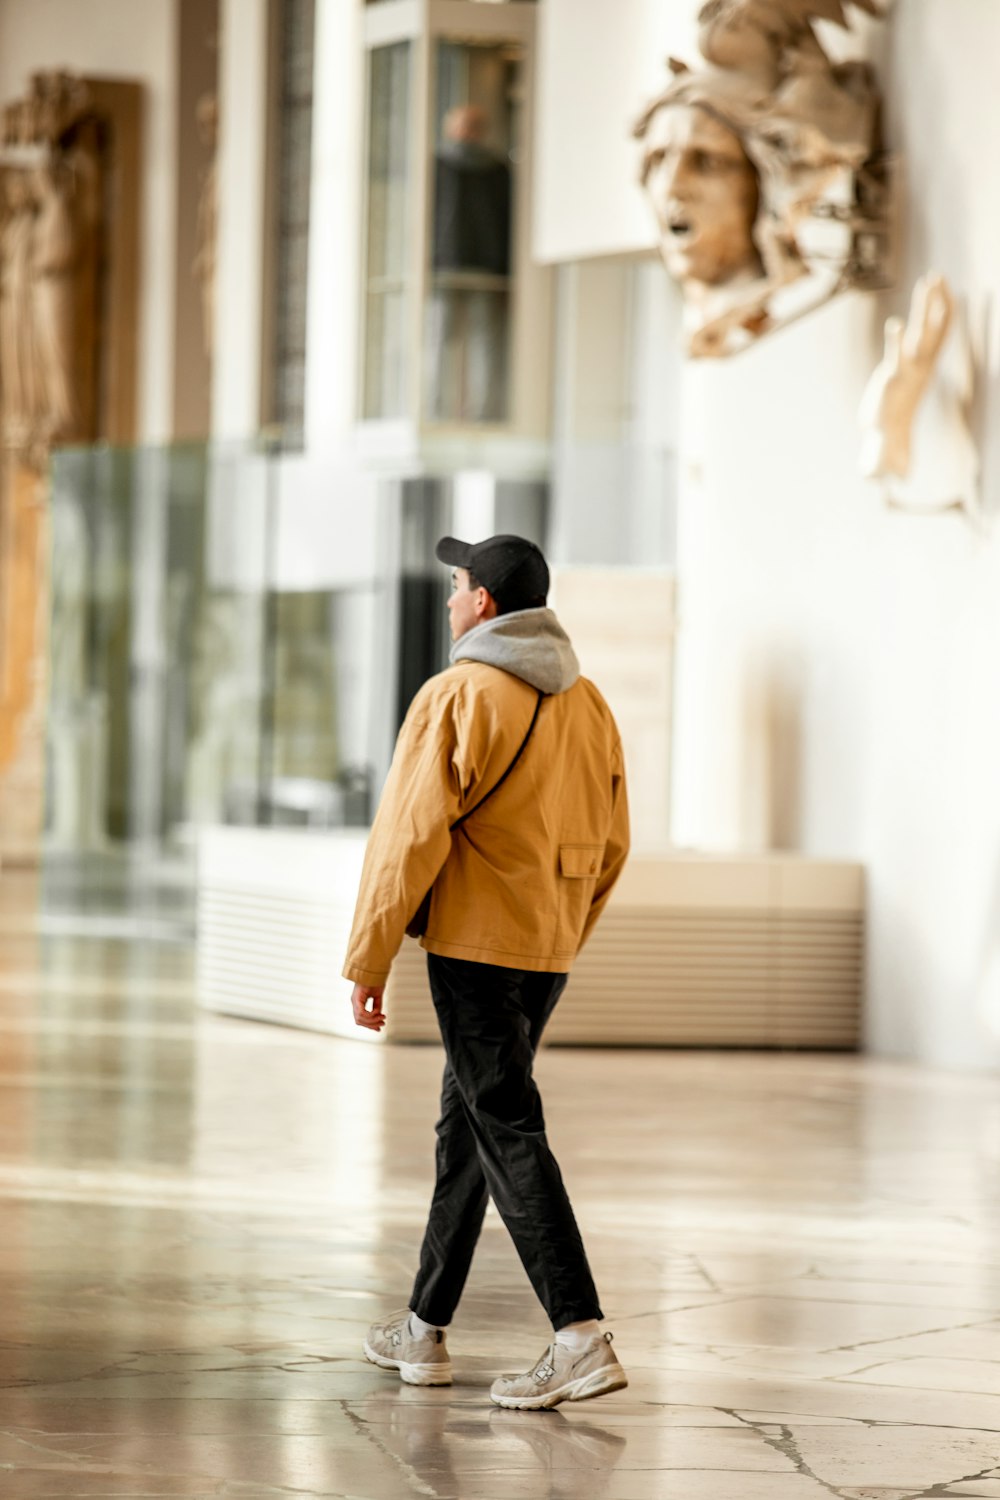 a man in a yellow jacket is walking through a building